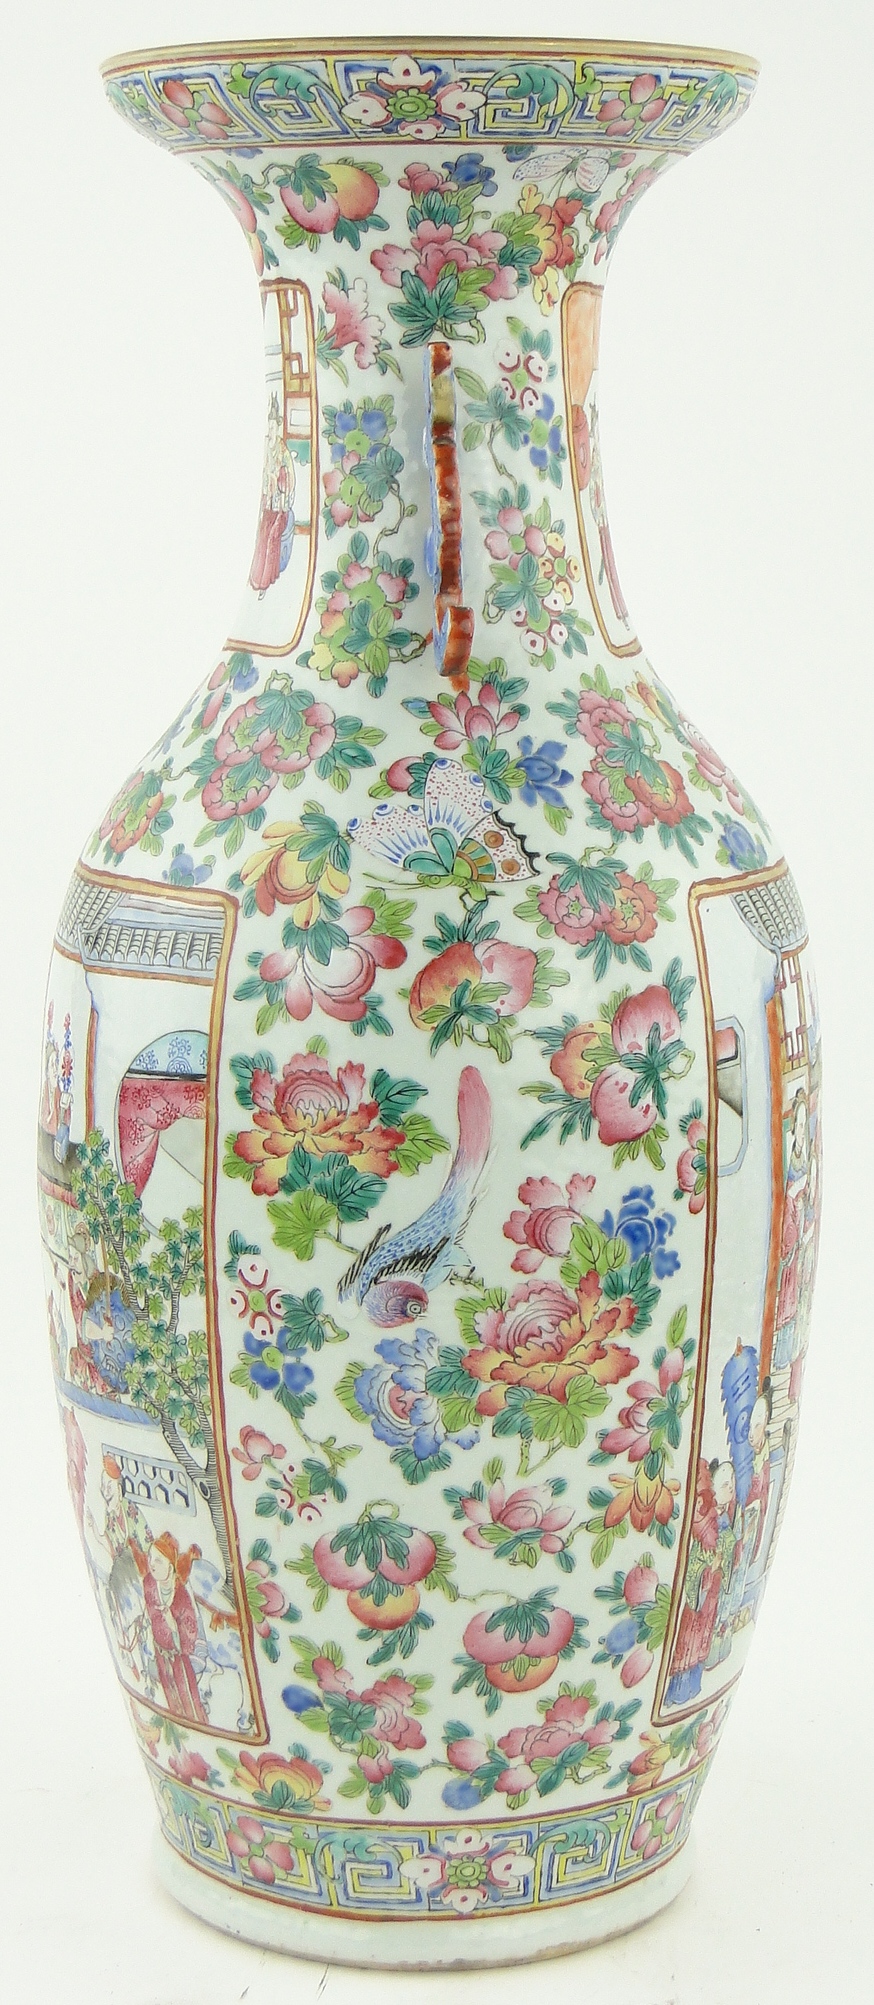 A Cantonese porcelain vase
with panels depicting figures, on butterfly and floral decorated ground, - Image 6 of 11